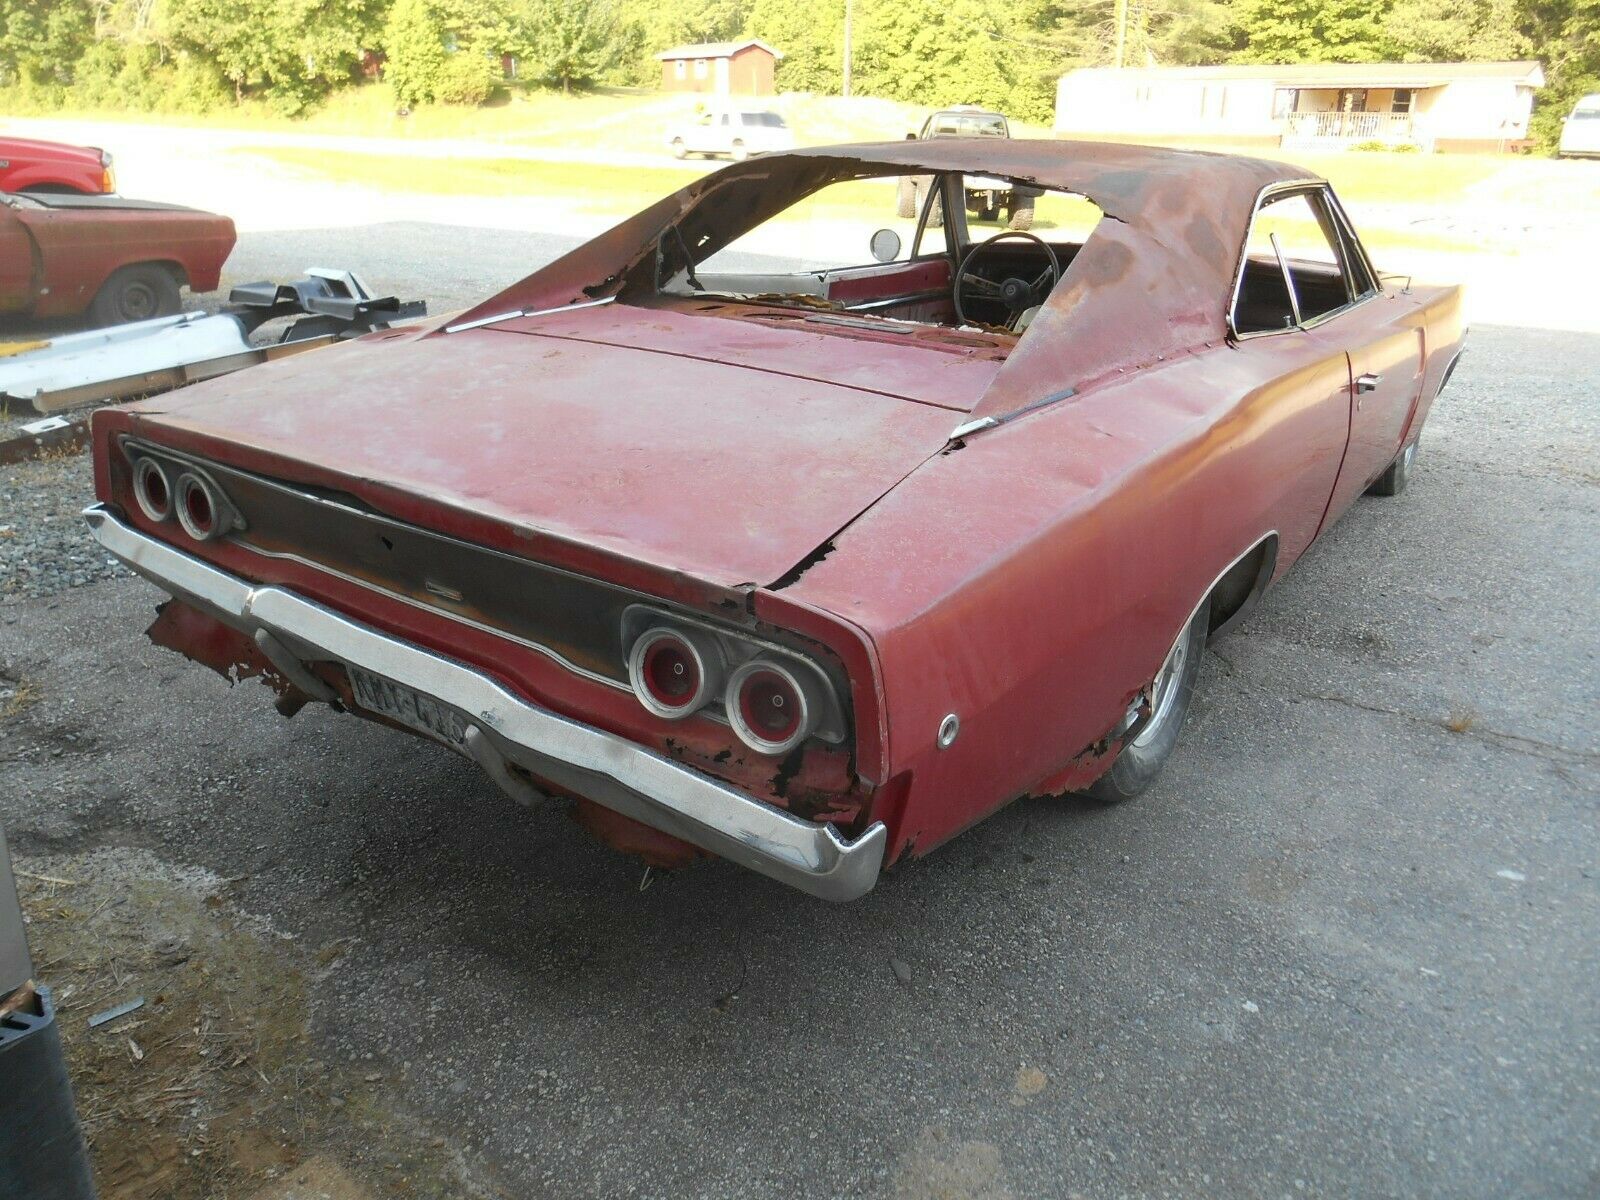 This 1968 Dodge Charger Is a Rare Car Not Appropriate for Amateur Restorers  - autoevolution